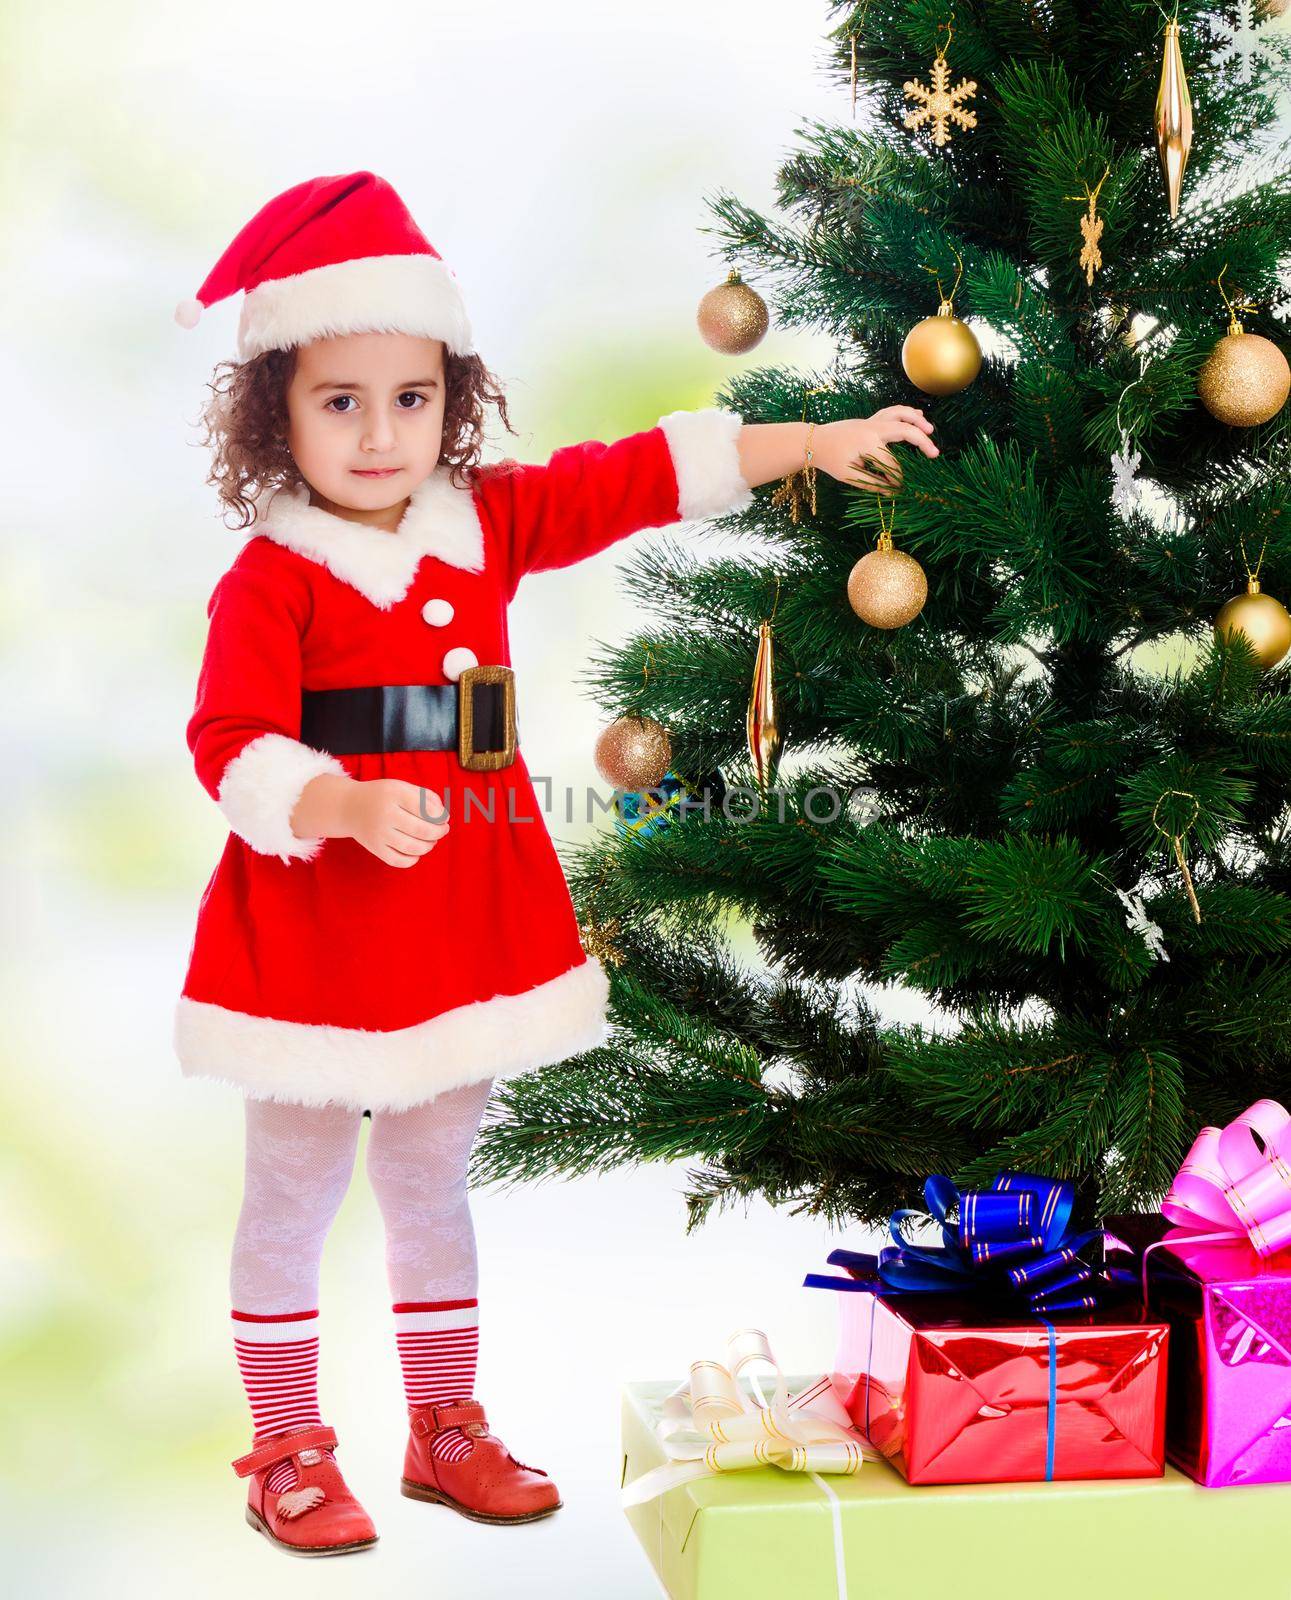 Adorable little curly-haired girl, dressed as Santa Claus decorates a Christmas tree toys.white-green blurred abstract background with snowflakes.